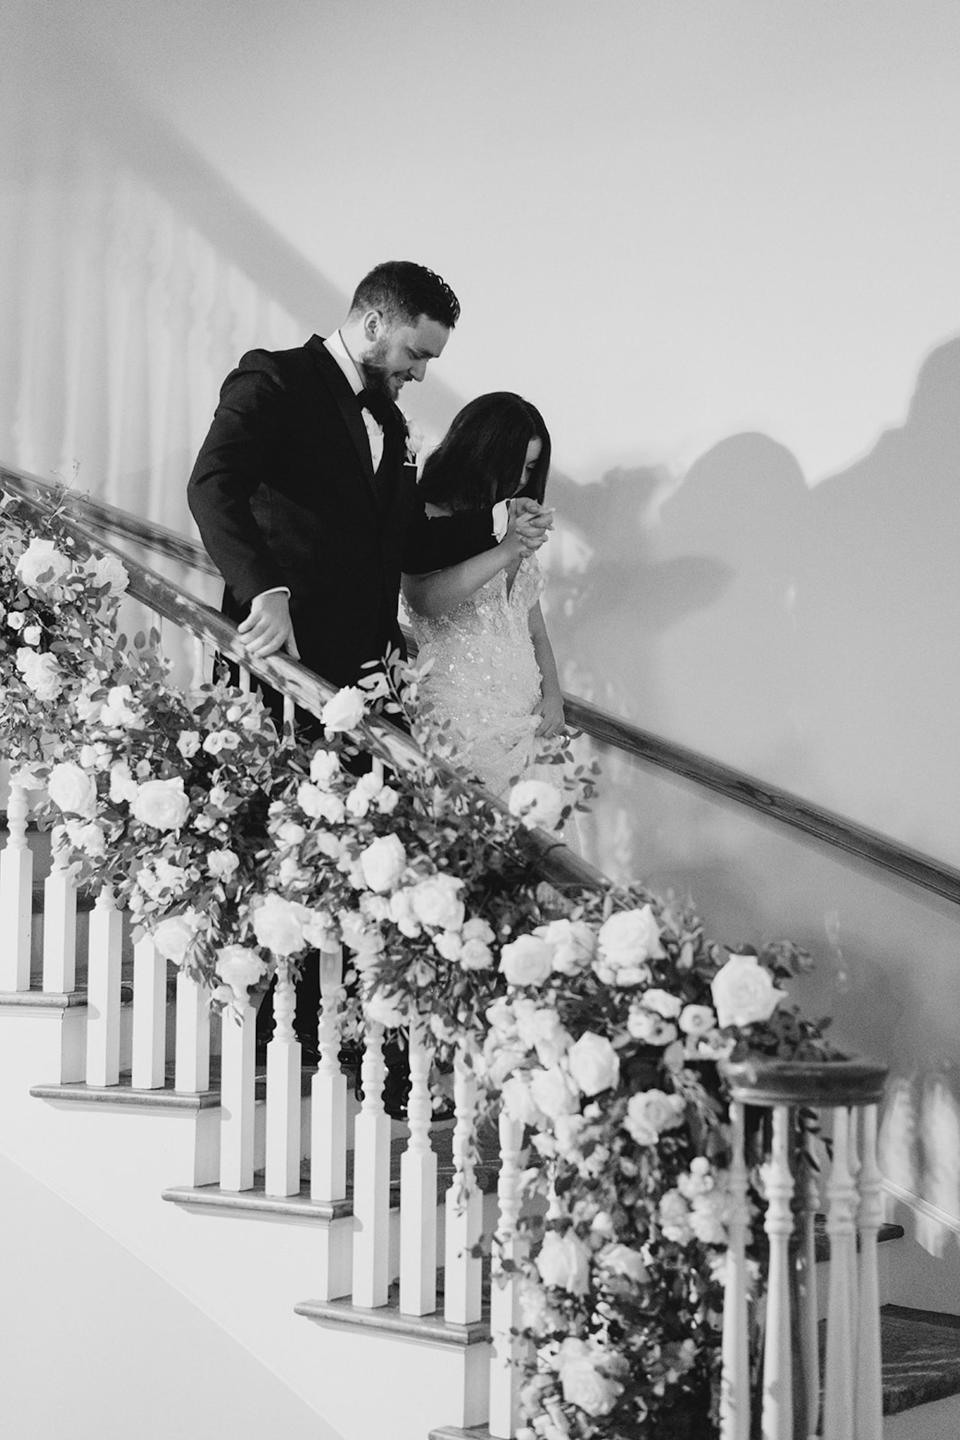 A bride and groom walk down stairs covered in flowers together.